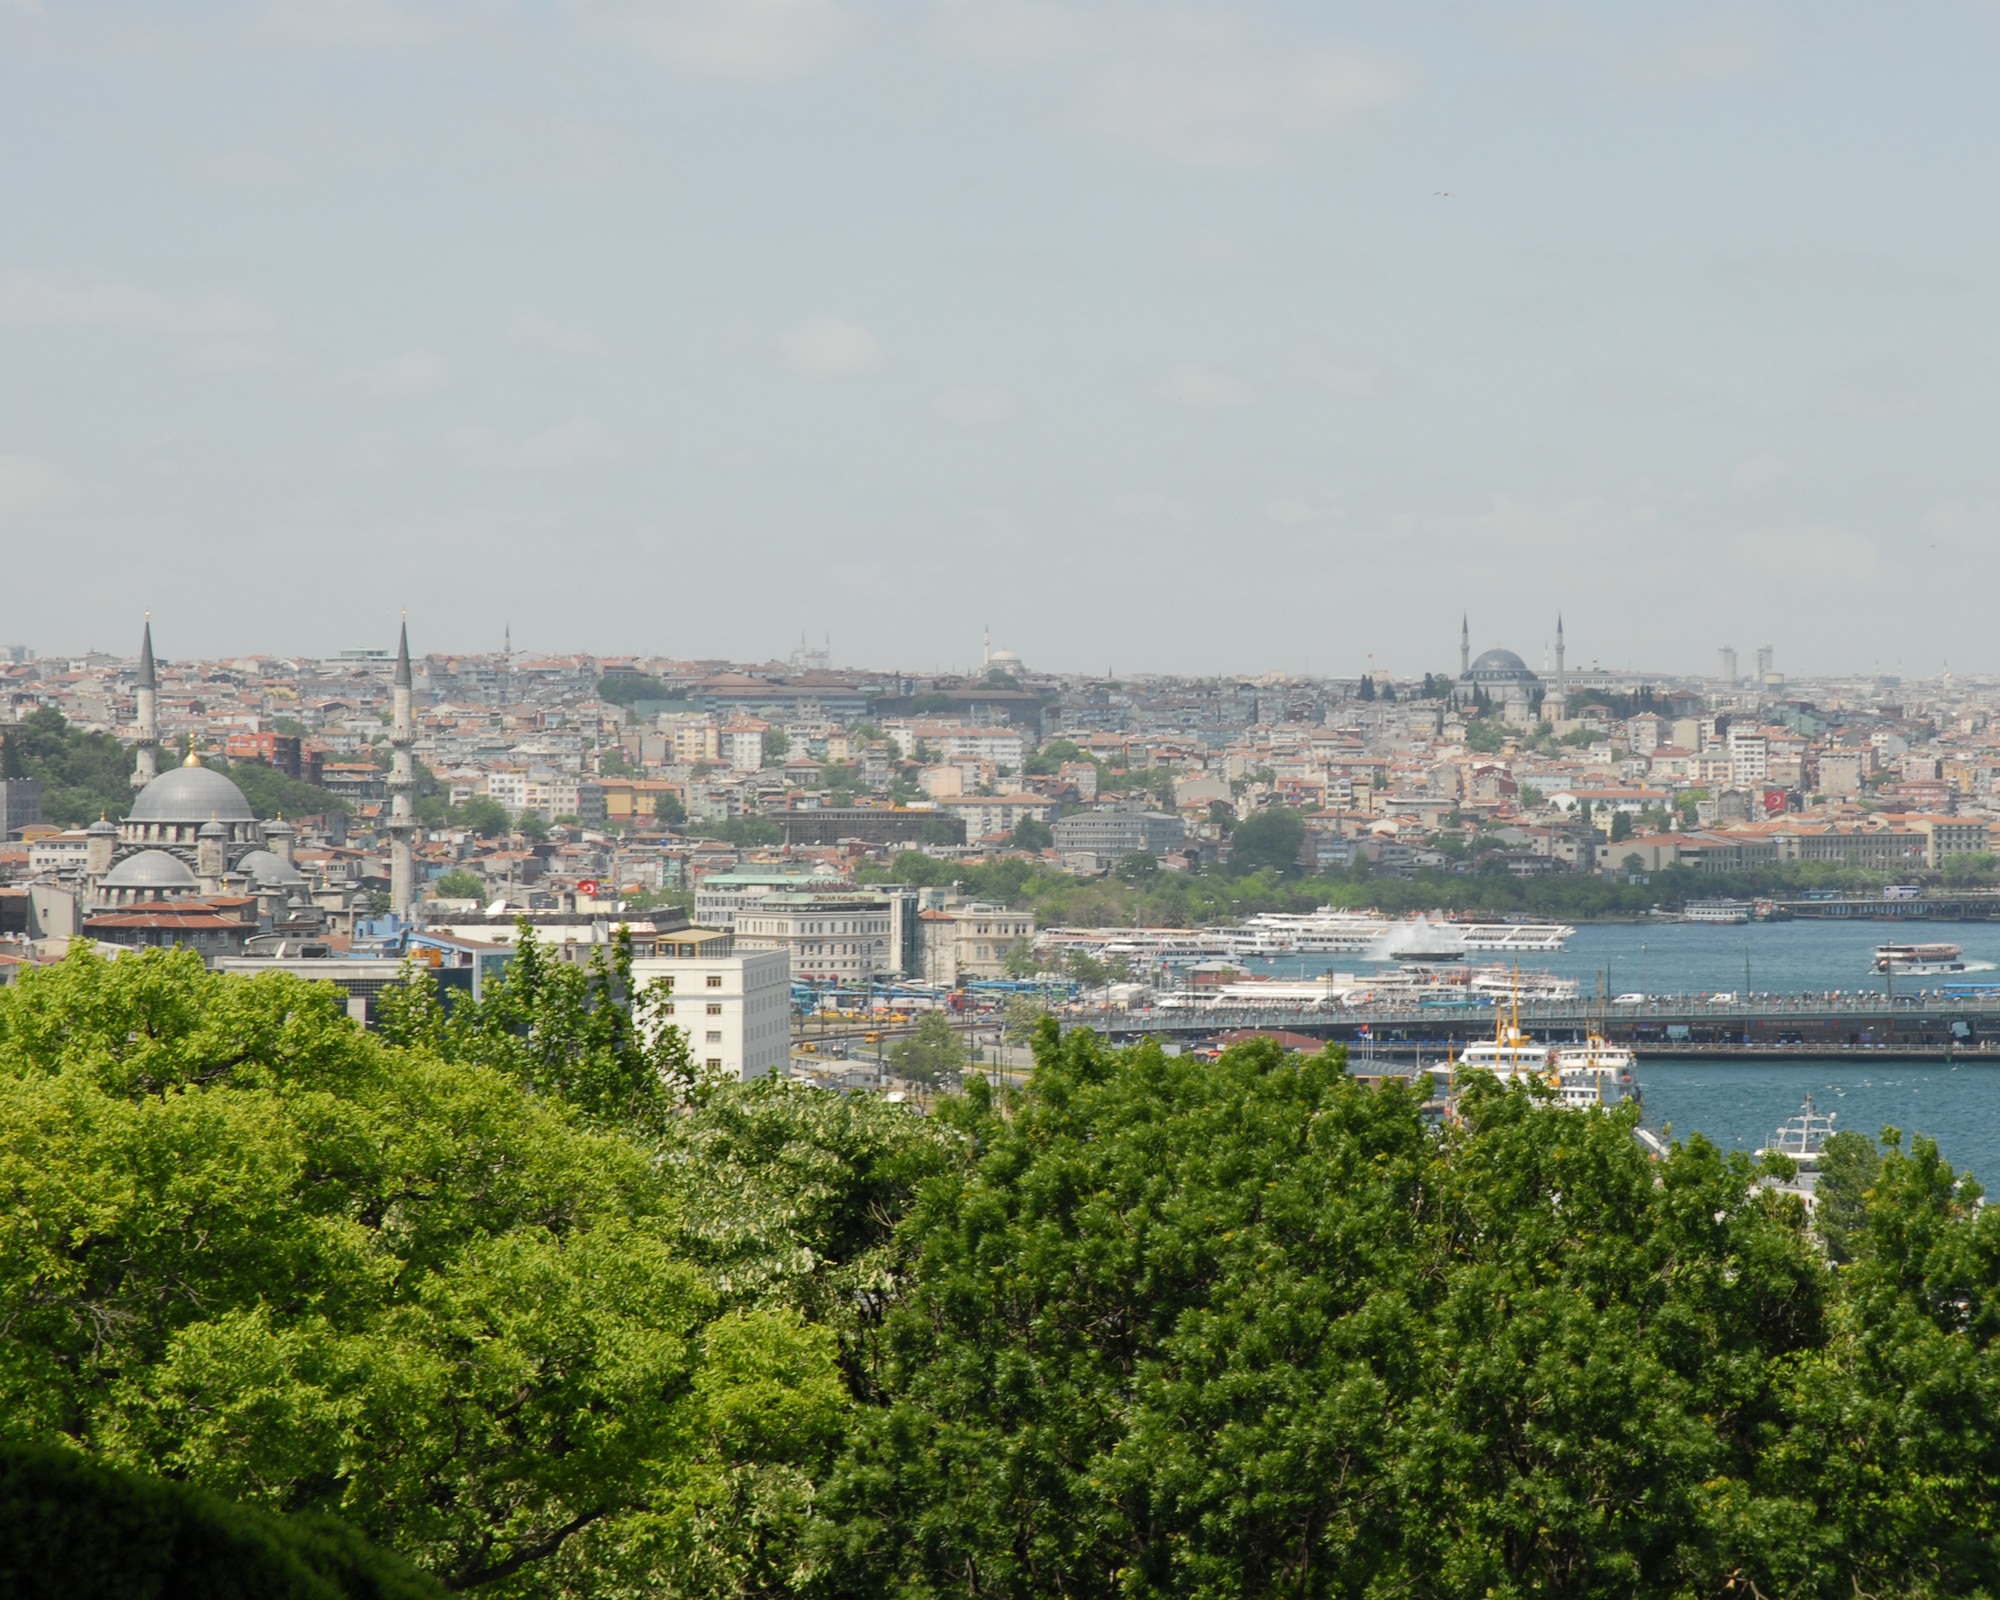 A view of Istanbul and the harbor of Golden Horn from the Topkapi Palace, Istanbul Turkey.  Istanbul has also been called Byzantium and Constantinople throughout history.  Istanbul is the largest city in Turkey and links Europe to Asia. (U.S. Air Force photo/Staff Sgt. Lauren Padden)
